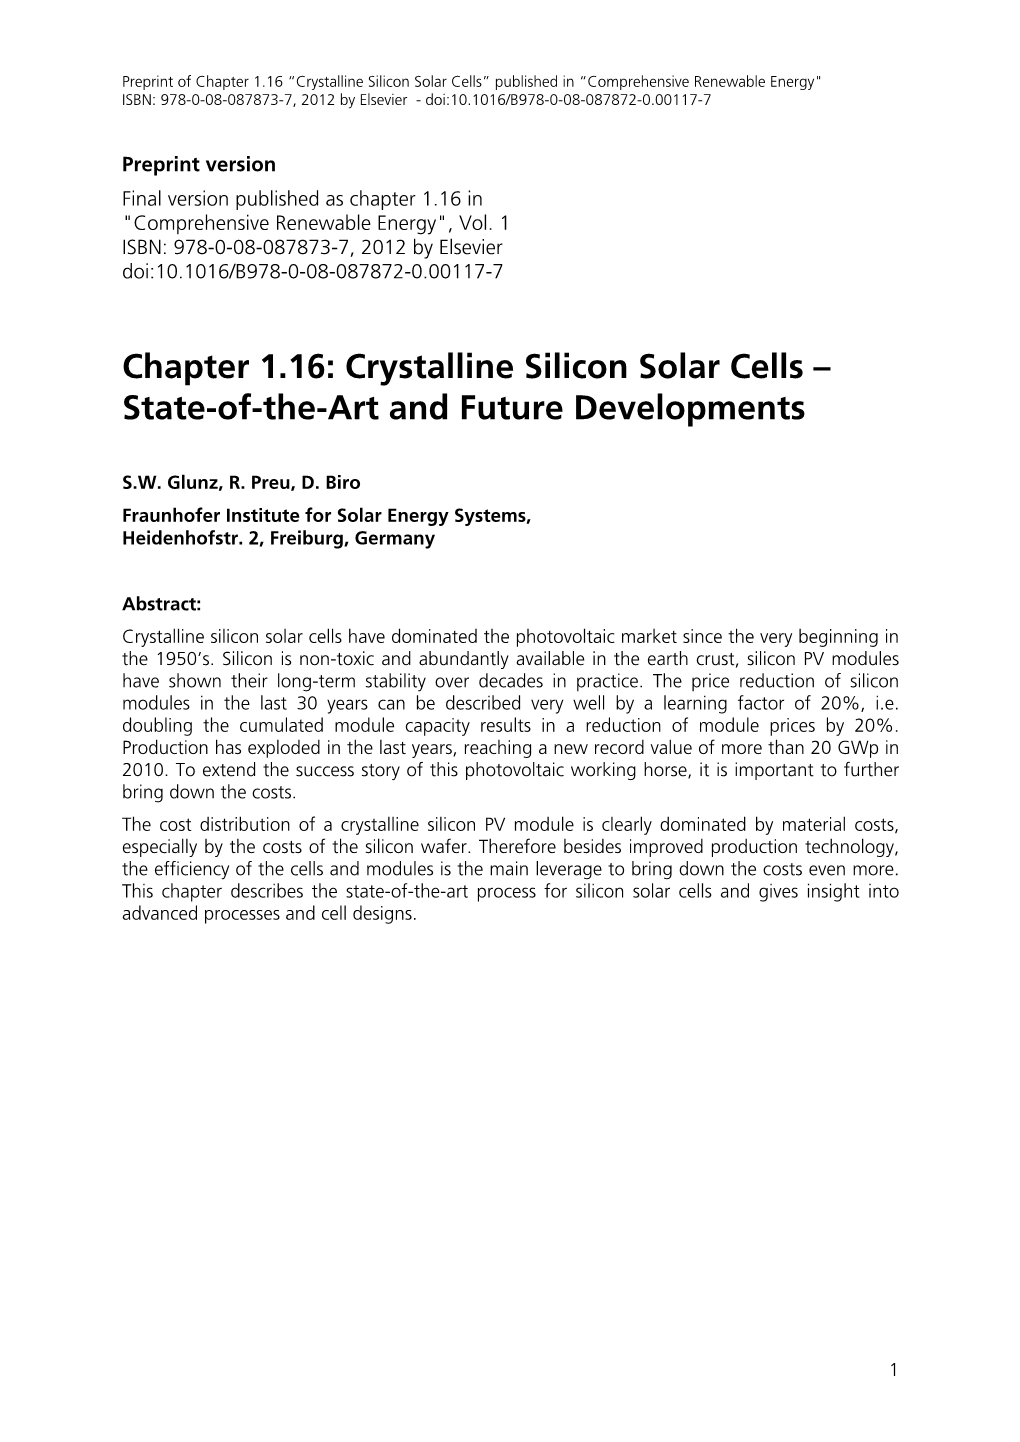 Chapter 1.16: Crystalline Silicon Solar Cells – State-Of-The-Art and Future Developments